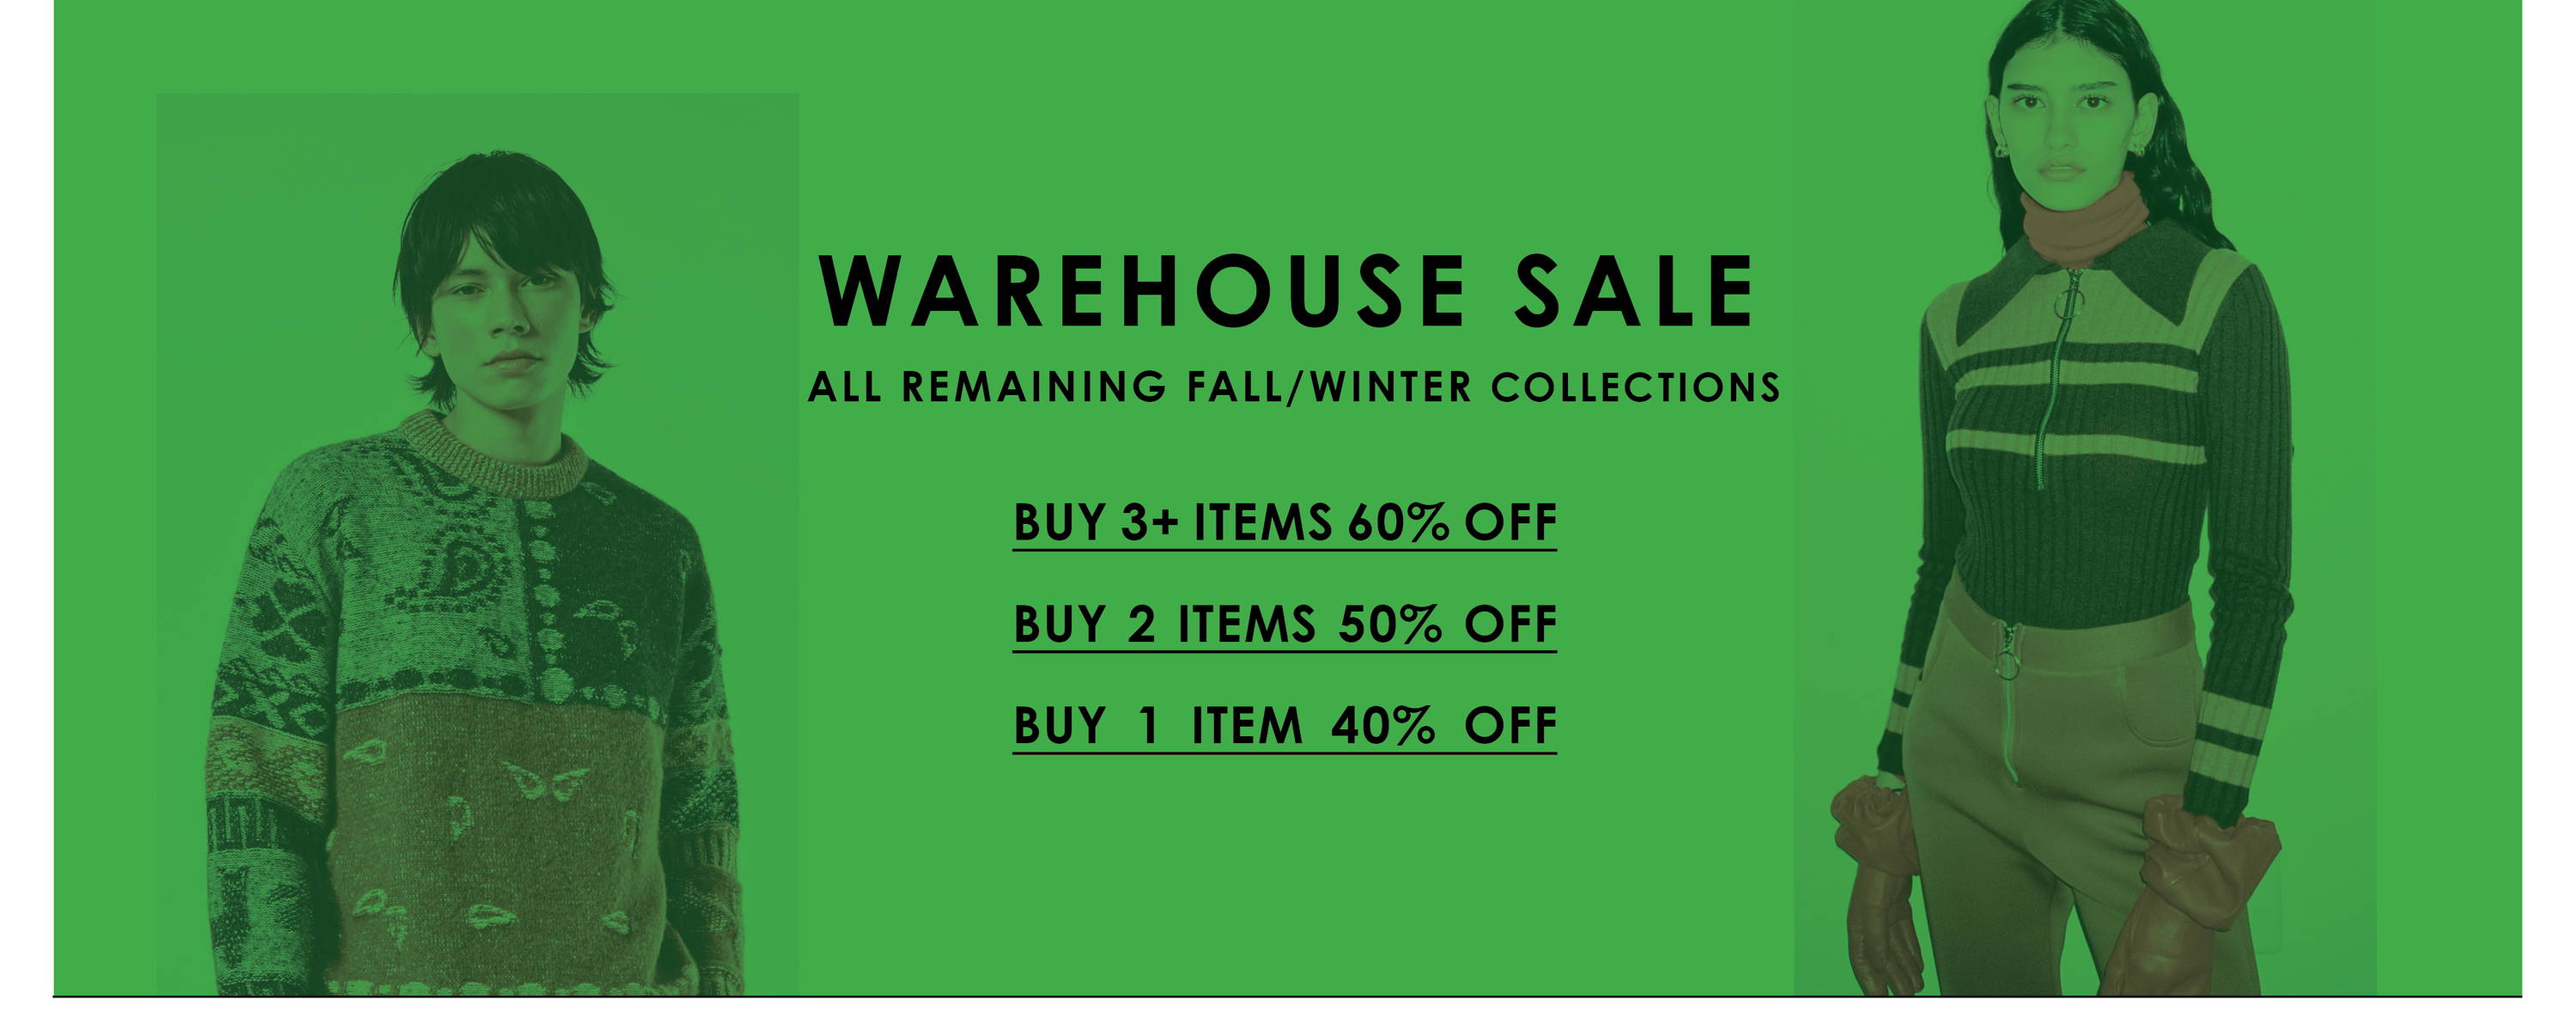 Shop the Warehouse Sale - Up to 60% Off